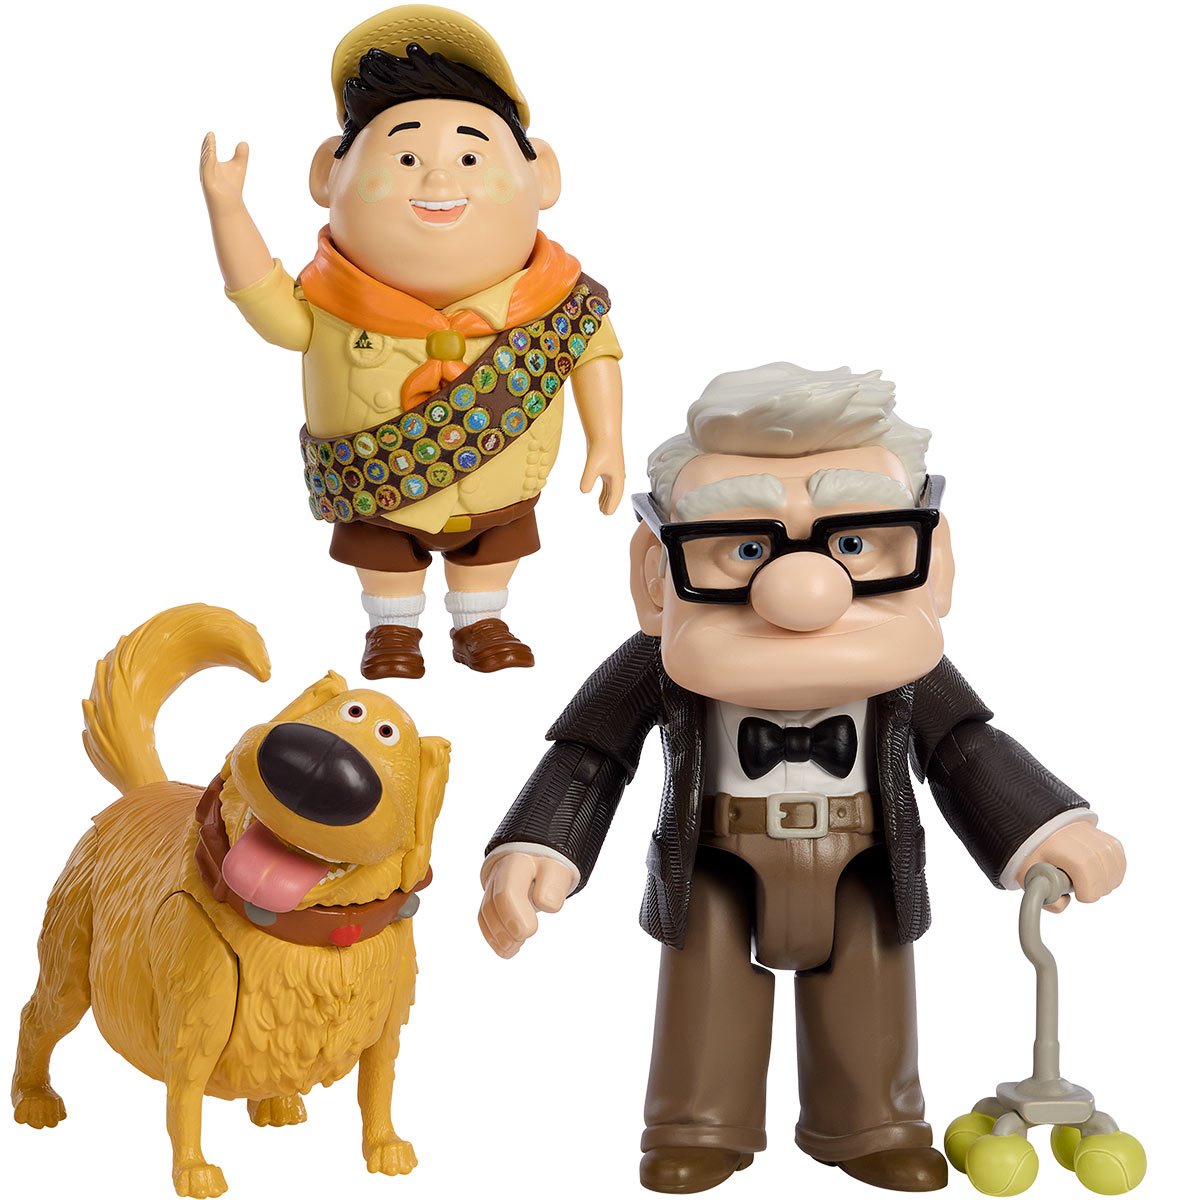 Disney Pixar Up 4Inch Scale Action Figure 3Pack